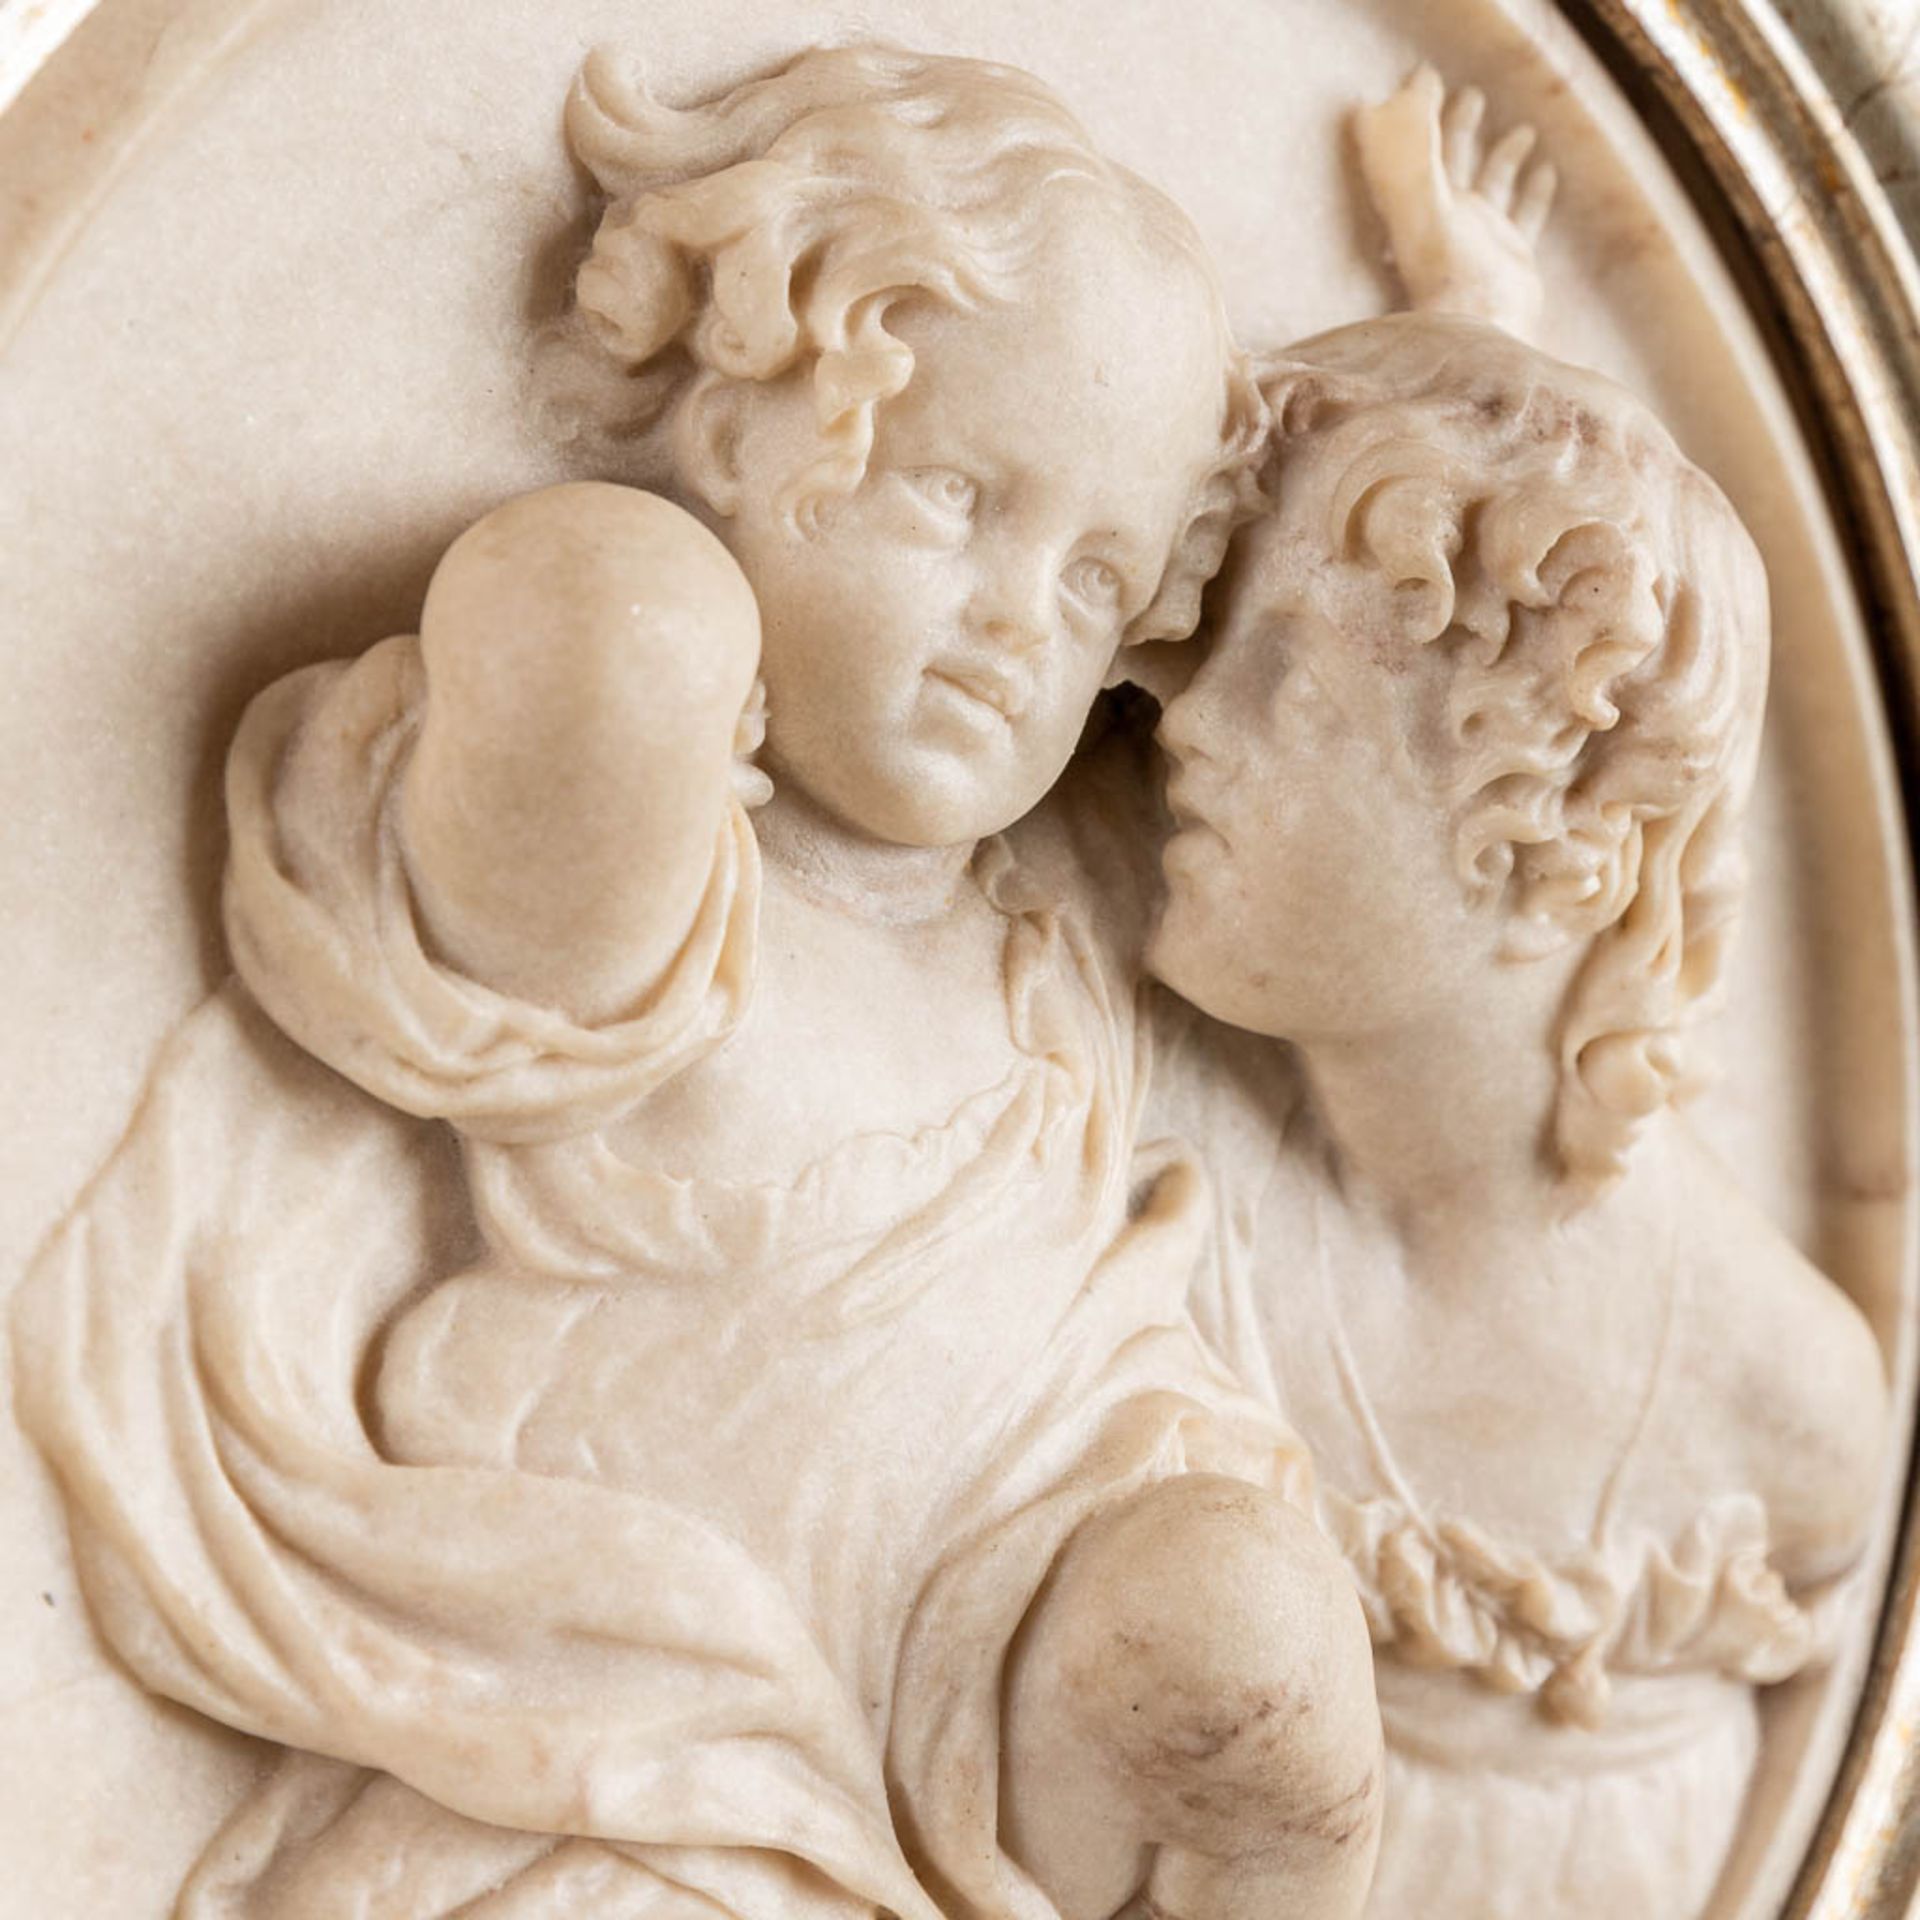 Edward William WYON (1811-1885)(attr.) A plaque made of sculptured marble with a bronze coin. - Image 3 of 8